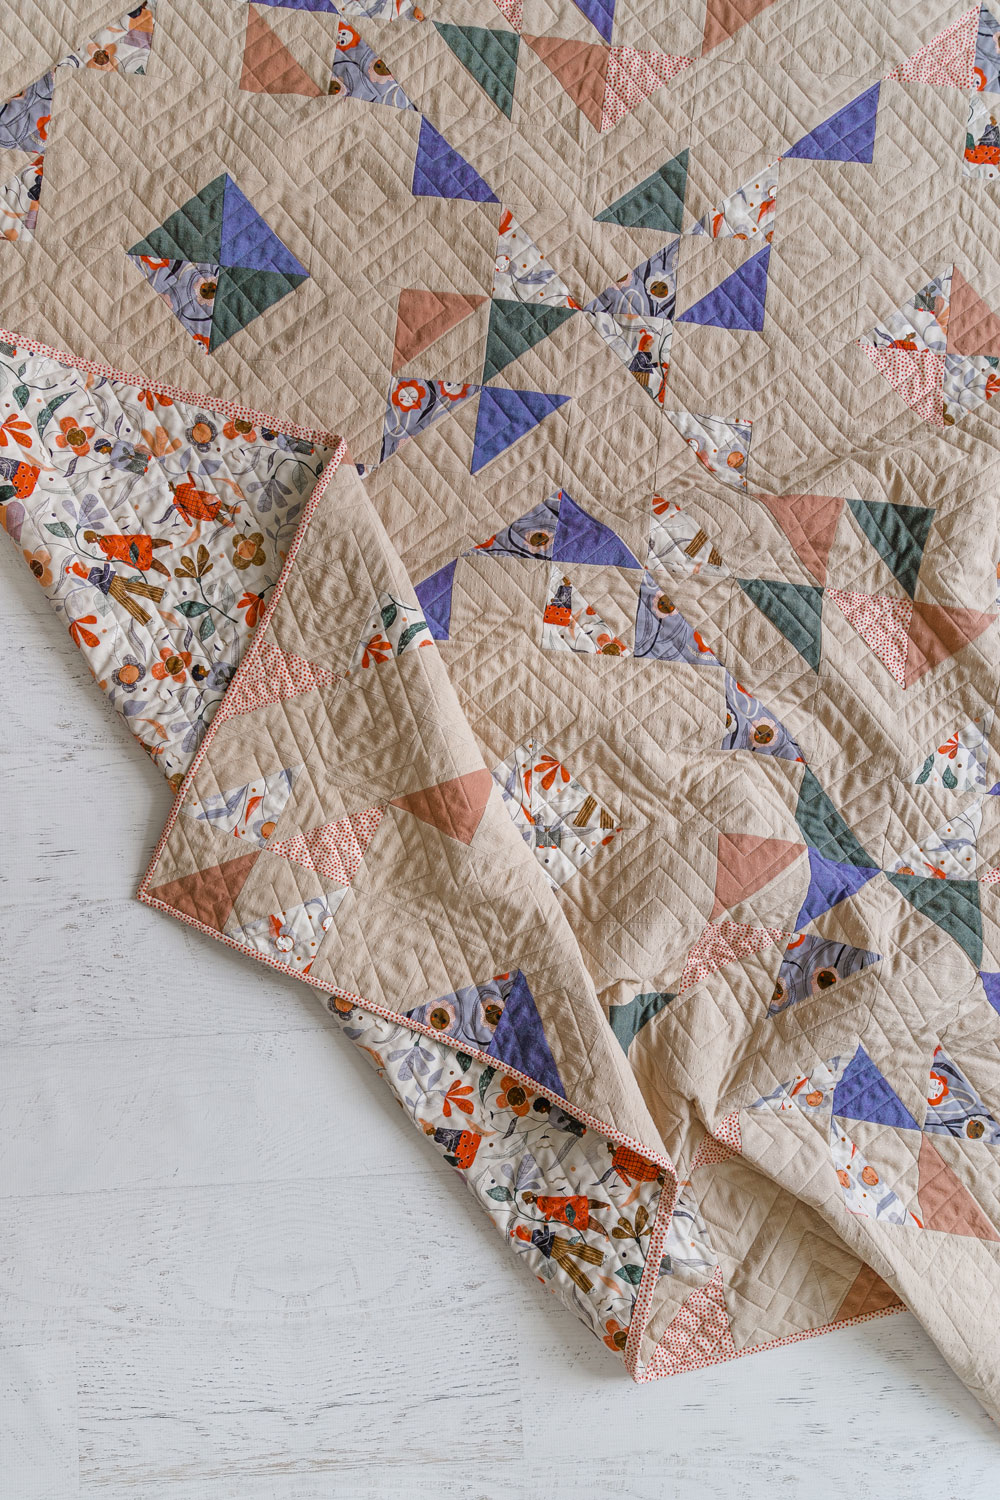 Learn our best tips and tricks for making the Summer Haze quilt pattern in our three part blog series! suzyquilts.com #sewingdiy #quilting